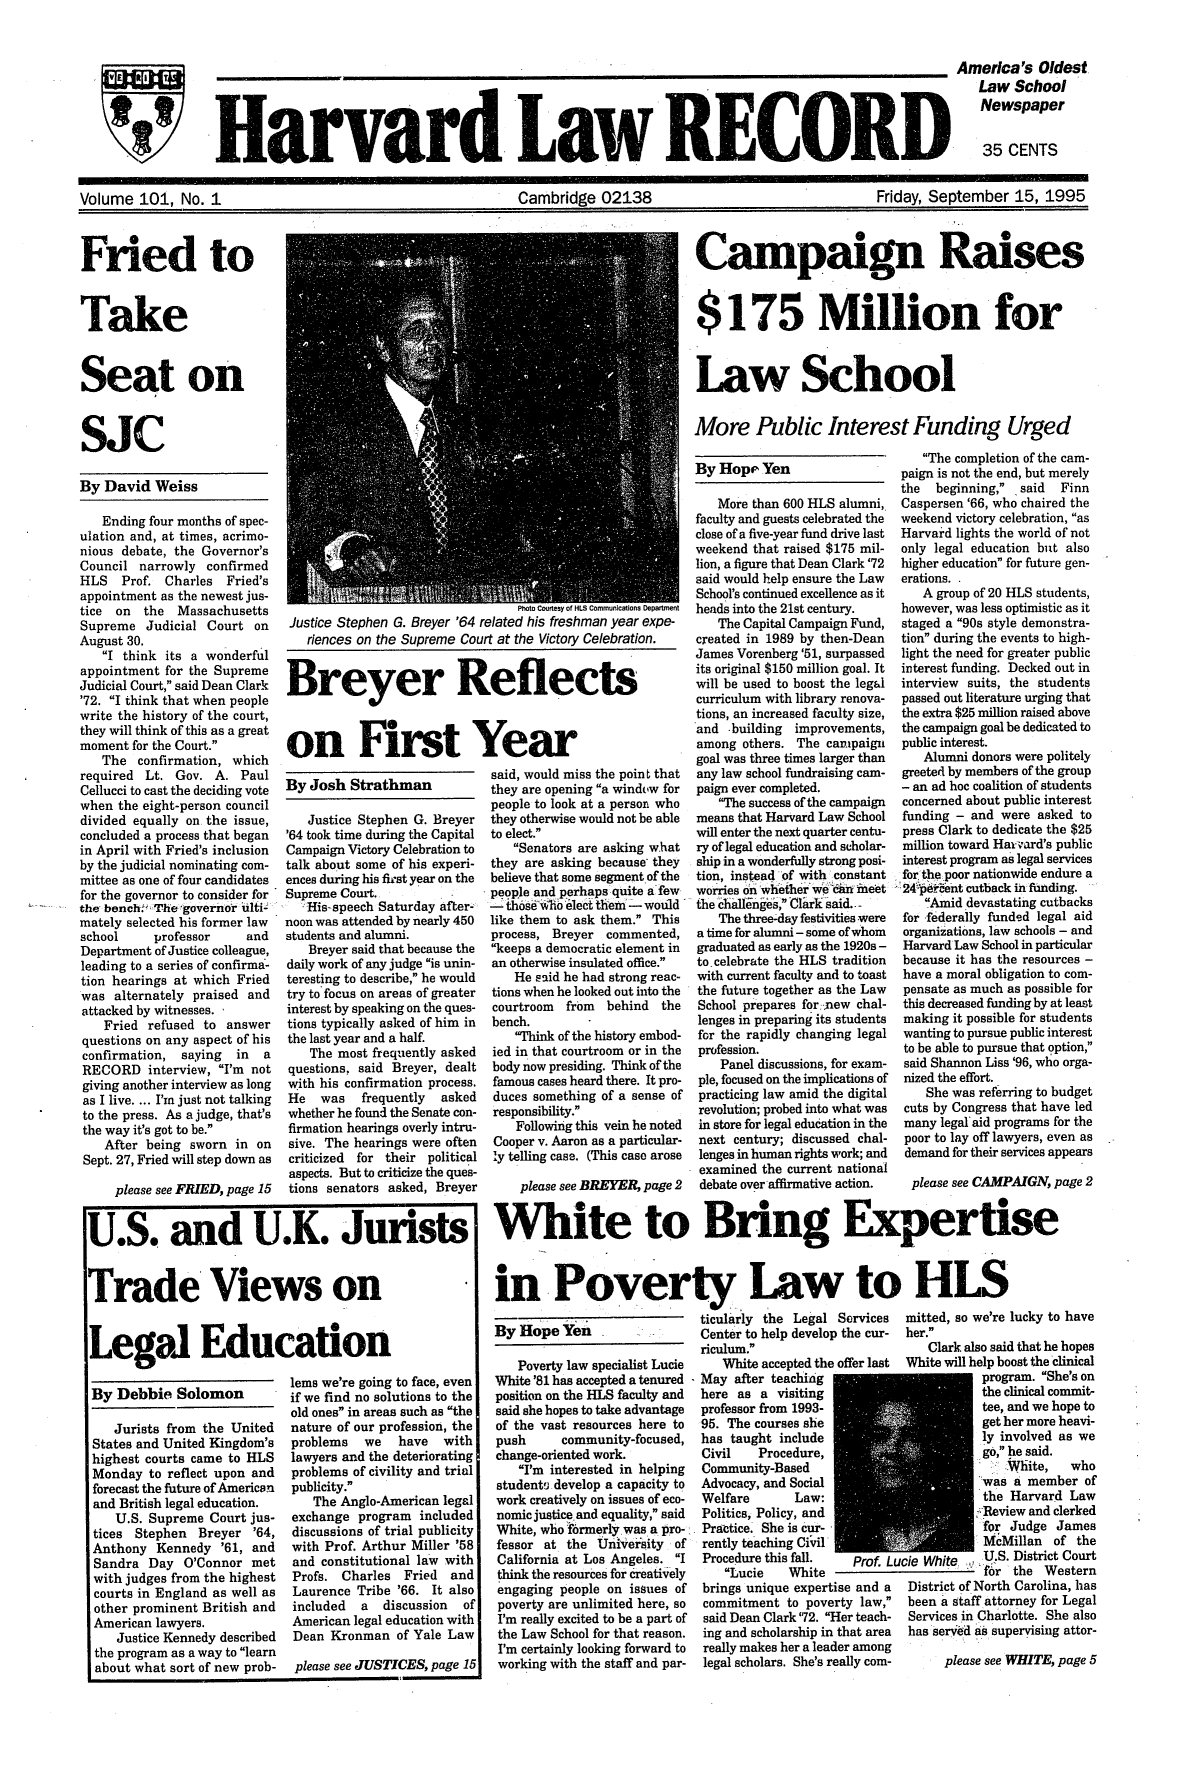 handle is hein.journals/hlrec101 and id is 1 raw text is: HvD                                                                  America's OldestLaw SchoolNewspaperHard Law RECORD 35 CENTSVolume 101, No. 1 CCambridge 02138                               Friday, September 15, 1995Fried toTakeSeat onSJcBy David WeissEnding four months of spec-ulation and, at times, acrimo-nious debate, the Governor'sCouncil narrowly confirmedHLS   Prof. Charles  Fried'sappointment as the newest jus-tice  on  the  MassachusettsSupreme Judicial Court onAugust 30.I think its a wonderfulappointment for the SupremeJudicial Court, said Dean Clark'72. I think that when peoplewrite the history of the court,they will think of this as a greatmoment for the Court.The confirmation, whichrequired Lt. Gov. A. PaulCellucci to cast the deciding votewhen the eight-person councildivided equally on the issue,concluded a process that beganin April with Fried's inclusionby the judicial nominating com-mittee as one of four candidatesfor the governor to consider forthe bench:TeTgovernor ulti-mately selected his former lawschool     professor    andDepartment of Justice colleague,leading to a series of confirma-tion hearings at which Friedwas alternately praised andattacked by witnesses. ,Fried refused to answerquestions on any aspect of hisconfirmation,  saying  in  aRECORD interview, I'm notgiving another interview as longas I live. ... I'm just not talkingto the press. As a judge, that'sthe way it's got to be.After being sworn in onSept. 27, Fried will step down asplease see FRIED, page 15Photourvtesy ofnH   Com muton DptmenctJustice Stephen G. Breyer '64 related his freshman year expe-riences on the Supreme Court at the Victory Celebration.Breyer Reflectson First YearBy Josh StrathmanJustice Stephen G. Breyer'64 took time during the CapitalCampaign Victory Celebration totalk about some of his experi-ences during his fit-st year on theSupreme Court.'His-speech Saturday after-noon was attended by nearly 450students and alumni.Breyer said that because thedaily work of any judge is unin-teresting to describe, he wouldtry to focus on areas of greaterinterest by speaking on the ques-tions typically asked of him inthe last year and a half.The most frequently askedquestions, said Breyer, dealtwith his confirmation process.He   was   frequently  askedwhether he found the Senate con-firmation hearings overly intru-sive. The hearings were oftencriticized for their politicalaspects. But to criticize the ques-tions senators asked, Breyersaid, would miss the point thatthey are opening a window forpeople to look at a person whothey otherwise would not be ableto elect.Senators are asking whatthey are asking because theybelieve that some segment of thepeople and perhaps quite a fewSthose   'Ilect them - wouldlike them to ask them. Thisprocess, Breyer commented,keeps a democratic element inan otherwise insulated office.He said he had strong reac-tions when he looked out into thecourtroom from behind thebench.Think of the history embod-ied in that courtroom or in thebody now presiding. Think of thefamous cases heard there. It pro-duces something of a sense ofresponsibility.Following this vein he notedCooper v. Aaron as a particular-ly telling case. (This case aroseplease see BREYER, page 2By Debbie SolomonJurists from the UnitedStates and United Kingdom'shighest courts came to HLSMonday to reflect upon andforecast the future of Americanand British legal education.U.S. Supreme Court jus-tices Stephen Breyer '64,Anthony Kennedy '61, andSandra Day O'Connor metwith judges from the highestcourts in England as well asother prominent British andAmerican lawyers.Justice Kennedy describedthe program as a way to learnabout what sort of new prob-lems we're going to face, evenif we find no solutions to theold ones in areas such as thenature of our profession, theproblems   we   have   withlawyers and the deterioratingproblems of civility and trialpublicity.The Anglo-American legalexchange program includeddiscussions of trial publicitywith Prof. Arthur Miller '58and constitutional law withProfs. Charles Fried    andLaurence Tribe '66. It alsoincluded  a   discussion  ofAmerican legal education withDean Kronman of Yale Lawplease see JUSTICES, page 15Campaign Raises$175 Million forLaw SchoolMore Public Interest Funding UrgedBy HopE' YenMore than 600 HLS alumni,faculty and guests celebrated theclose of a five-year fund drive lastweekend that raised $175 mil-lion, a figure that Dean Clark '72said would help ensure the LawSchool's continued excellence as itheads into the 21st century.The Capital Campaign Fund,created in 1989 by then-DeanJames Vorenberg '51, surpassedits original $150 million goal. Itwill be used to boost the legalcurriculum with library renova-tions, an increased faculty size,and -building improvements,among others. The campaigngoal was three times larger thanany law school fundraising cam-paign ever completed.The success of the campaignmeans that Harvard Law Schoolwill enter the next quarter centu-ry of legal education and scholar-ship in a wonderfully strong posi-tion, instead of with constantworries on whetherwe c-neetthe c~all6nges, Clark said. -The three-day festivities werea time for alumni - some of whomgraduated as early as the 1920s -to celebrate the HLS traditionwith current faculty and to toastthe future together as the LawSchool prepares for new chal-lenges in preparing its studentsfor the rapidly changing legalprofession.Panel discussions, for exam-ple, focused on the implications ofpracticing law amid the digitalrevolution; probed into what wasin store for legal education in thenext century; discussed chal-lengesin human rights work; andexamined the current nationaldebate over affirmative action.White to Bring Exin Poverty, Law toYen     ticularly the Legal ServicesBy Hopeiri     Center to help develop the cur-Poverty law specialist LucieWhite '81 has accepted a tenuredposition on the HLS faculty andsaid she hopes to take advantageof the vast resources here topush      community-focused,change-oriented work.I'm interested in helpingstudentj develop a capacity towork creatively on issues of eco-nomic justice. and equality, saidWhite, who frmerly was a pro-ifessor at the University ofCalifornia at Los Angeles. Ithink the resources for creativelyengaging people on issues ofpoverty are unlimited here, soI'm really excited to be a part ofthe Law School for that reason.I'm certainly looking forward toworking with the staff and par-riculum.White accepted the offer lastMay after teachinghere as a visitingprofessor from 1993-95. The courses shehas taught includeCivil    Procedure,Community-BasedAdvocacy, and SocialWelfare       Law:Politics, Policy, andPractice. She is Cur-rently teaching CivilProcedure this fall.   Prof. LuLucie    Whitebrings unique expertise and acommitment to poverty law,said Dean Clark '72. Her teach-ing and scholarship in that areareally makes her a leader amonglegal scholars. She's really com-The completion of the cam-paign is not the end, but merelythe  beginning, _ said  FinnCaspersen '66, who chaired theweekend victory celebration, asHarvard lights the world of notonly legal education but alsohigher education for future gen-erations..A group of 20 HLS students,however, was less optimistic as itstaged a 90s style demonstra-tion during the events to high-light the need for greater publicinterest funding. Decked out ininterview suits, the studentspassed out literature urging thatthe extra $25 million raised abovethe campaign goal be dedicated topublic interest.Alumni donors were politelygreeted by members of the group- an ad hoc coalition of studentsconcerned about public interestfunding - and were asked topress Clark to dedicate the $25million toward Ha-,ard's publicinterest program as legal servicesfor thepoor nationwide endure a24perent cutback in funding.Amid devastating cutbacksfor federally funded legal aidorganizations, law schools - andHarvard Law School in particularbecause it has the resources -have a moral obligation to com-pensate as much as possible forthis decreased funding by at leastmaking it possible for studentswanting to pursue public interestto be able to pursue that option,said Shannon Liss '96, who orga-nized the effort.She was referring to budgetcuts by Congress that have ledmany legal' aid programs for thepoor to lay off lawyers, even asdemand for their services appearsplease see CAMPAIGN, page 2pertiseHLSmitted, so we're lucky to haveher.Clark also said that he hopesWhite will help boost the clinicalprogram. She's onthe clinical commit-tee, and we hope toget her more heavi-ly involved as wego, he said..,White,  whowas a member ofthe Harvard Law::Review and clerkedfor Judge JamesMcMillan of theucie White.  U.S. District Courtf r the WesternDistrict of North Carolina, hasbeen a staff attorney for LegalServices in Charlotte. She alsohas served as supervising attor-please see WHITE, page 5U.S. and U.K. JuristsTrade Views onLegal Education.............. m--W